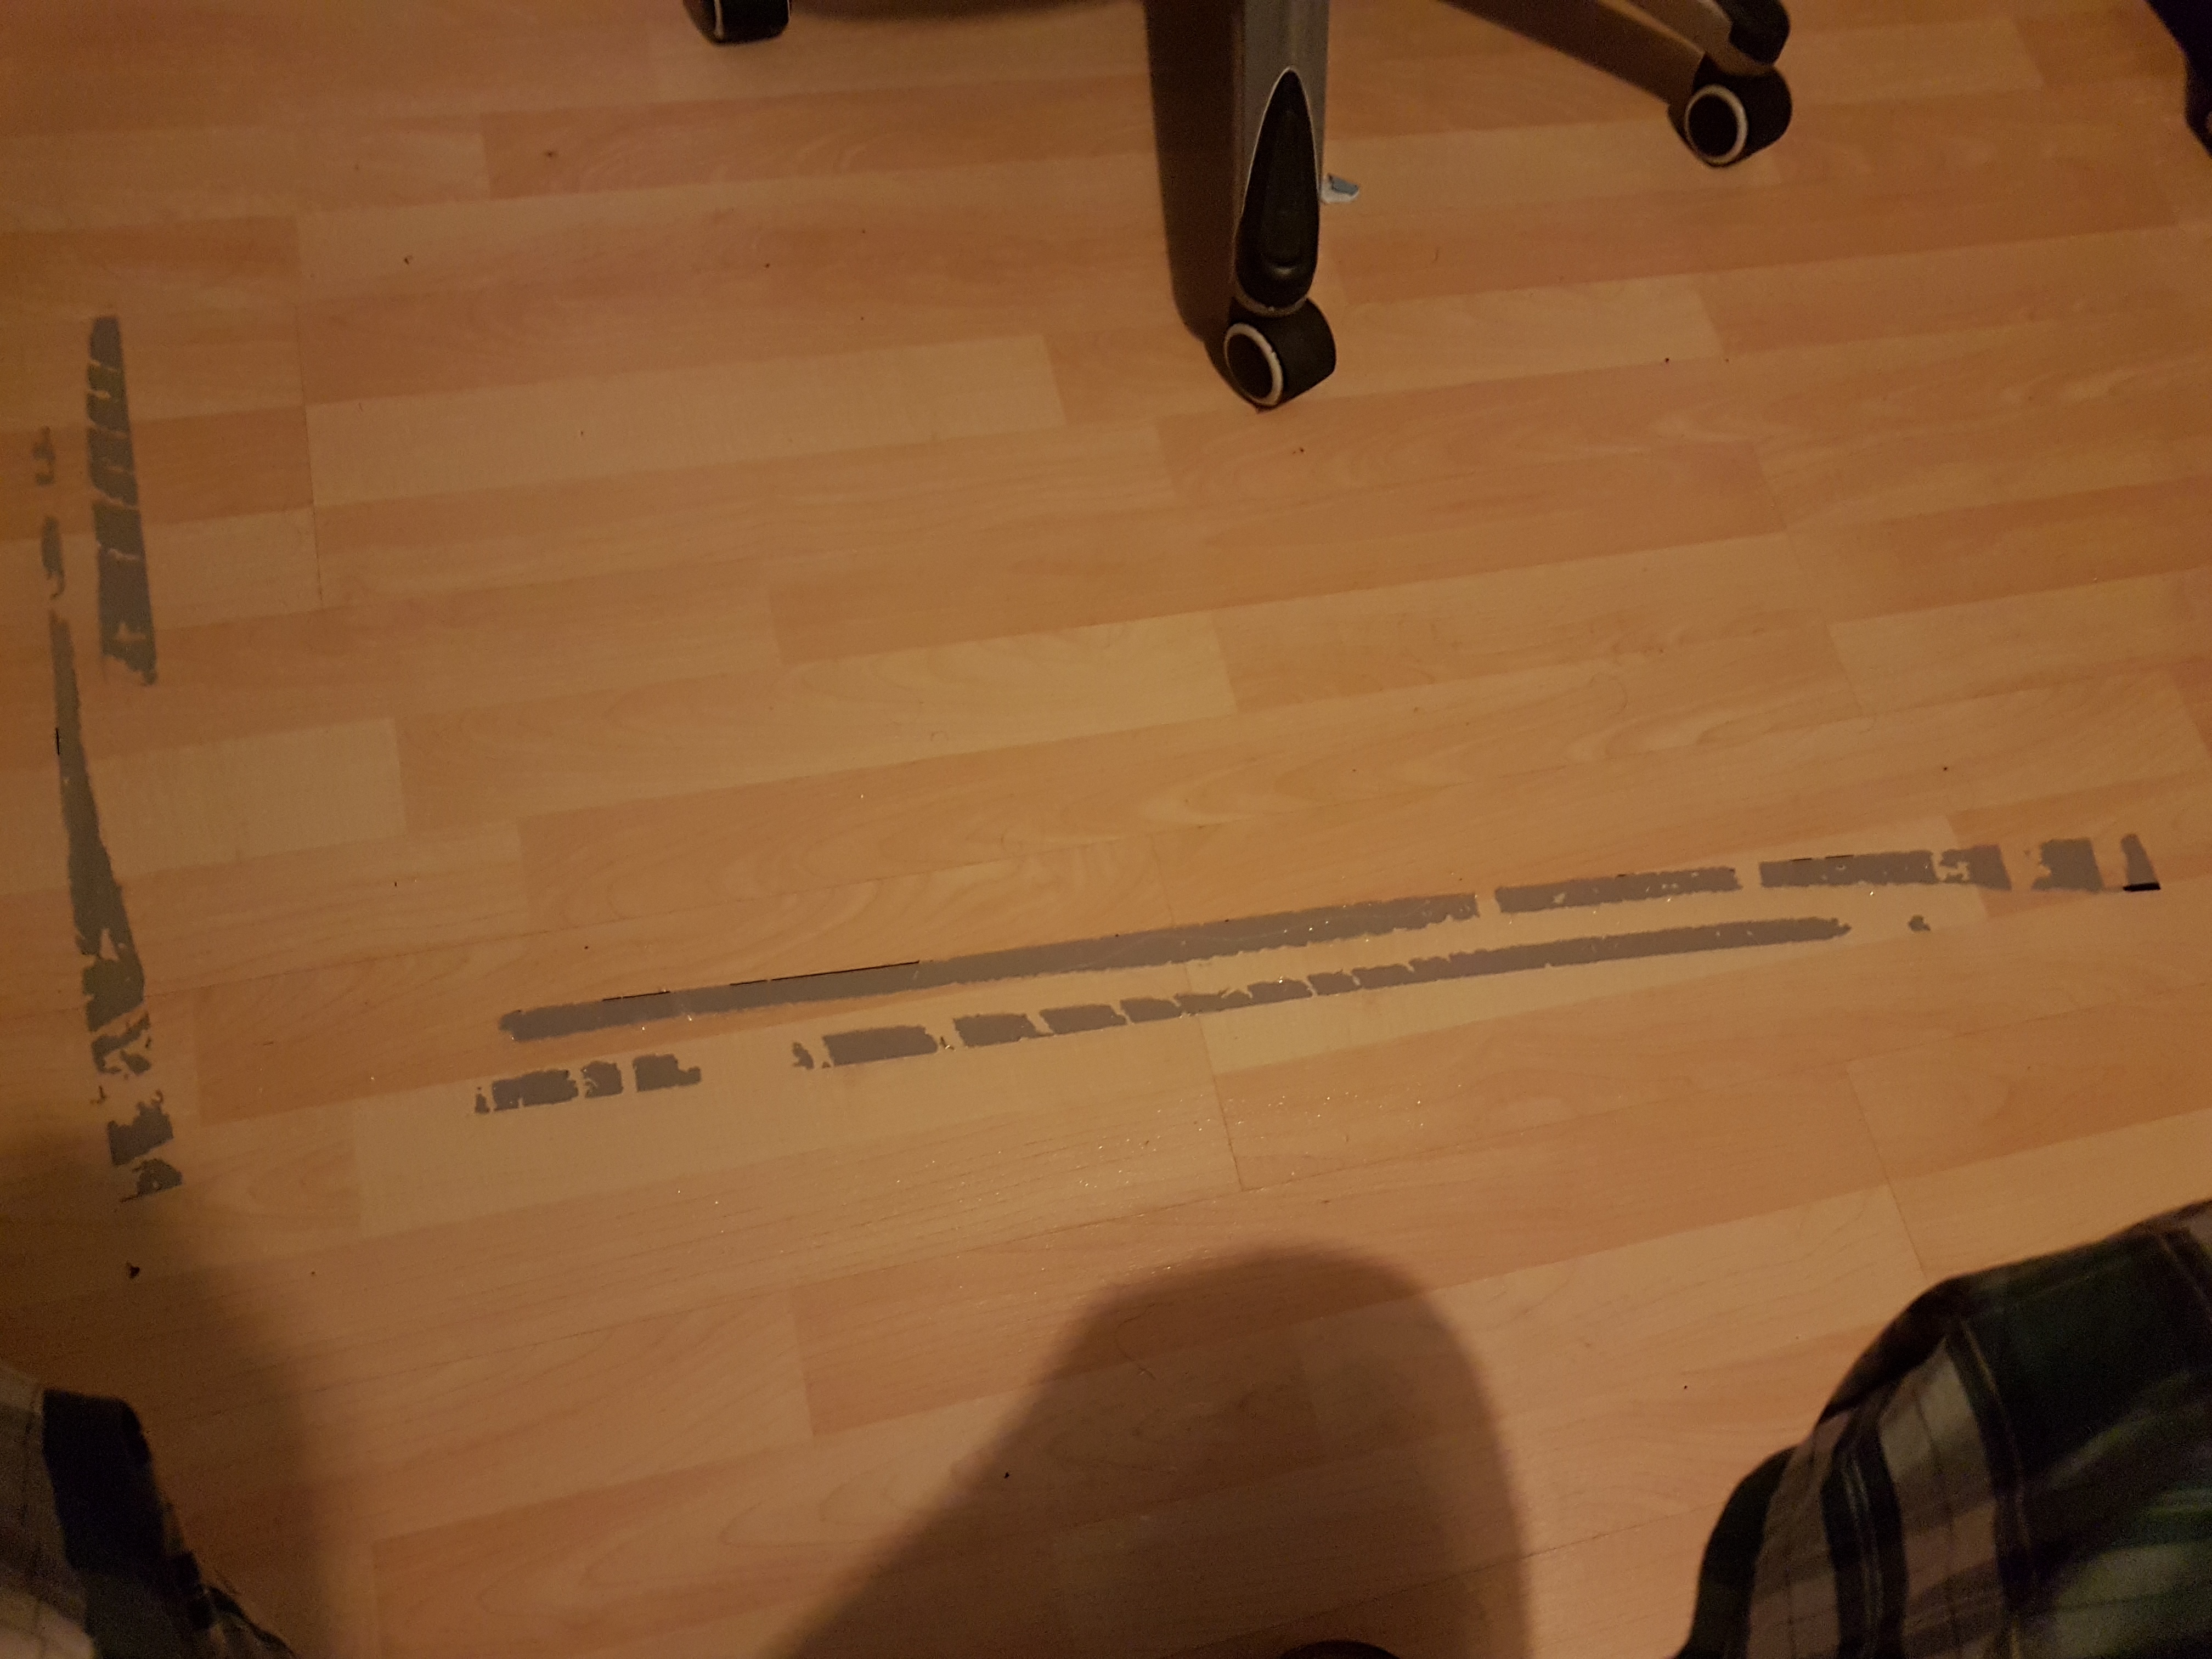 Diy Help How To Get This Sticky Tape Residue Off My Wooden Floor